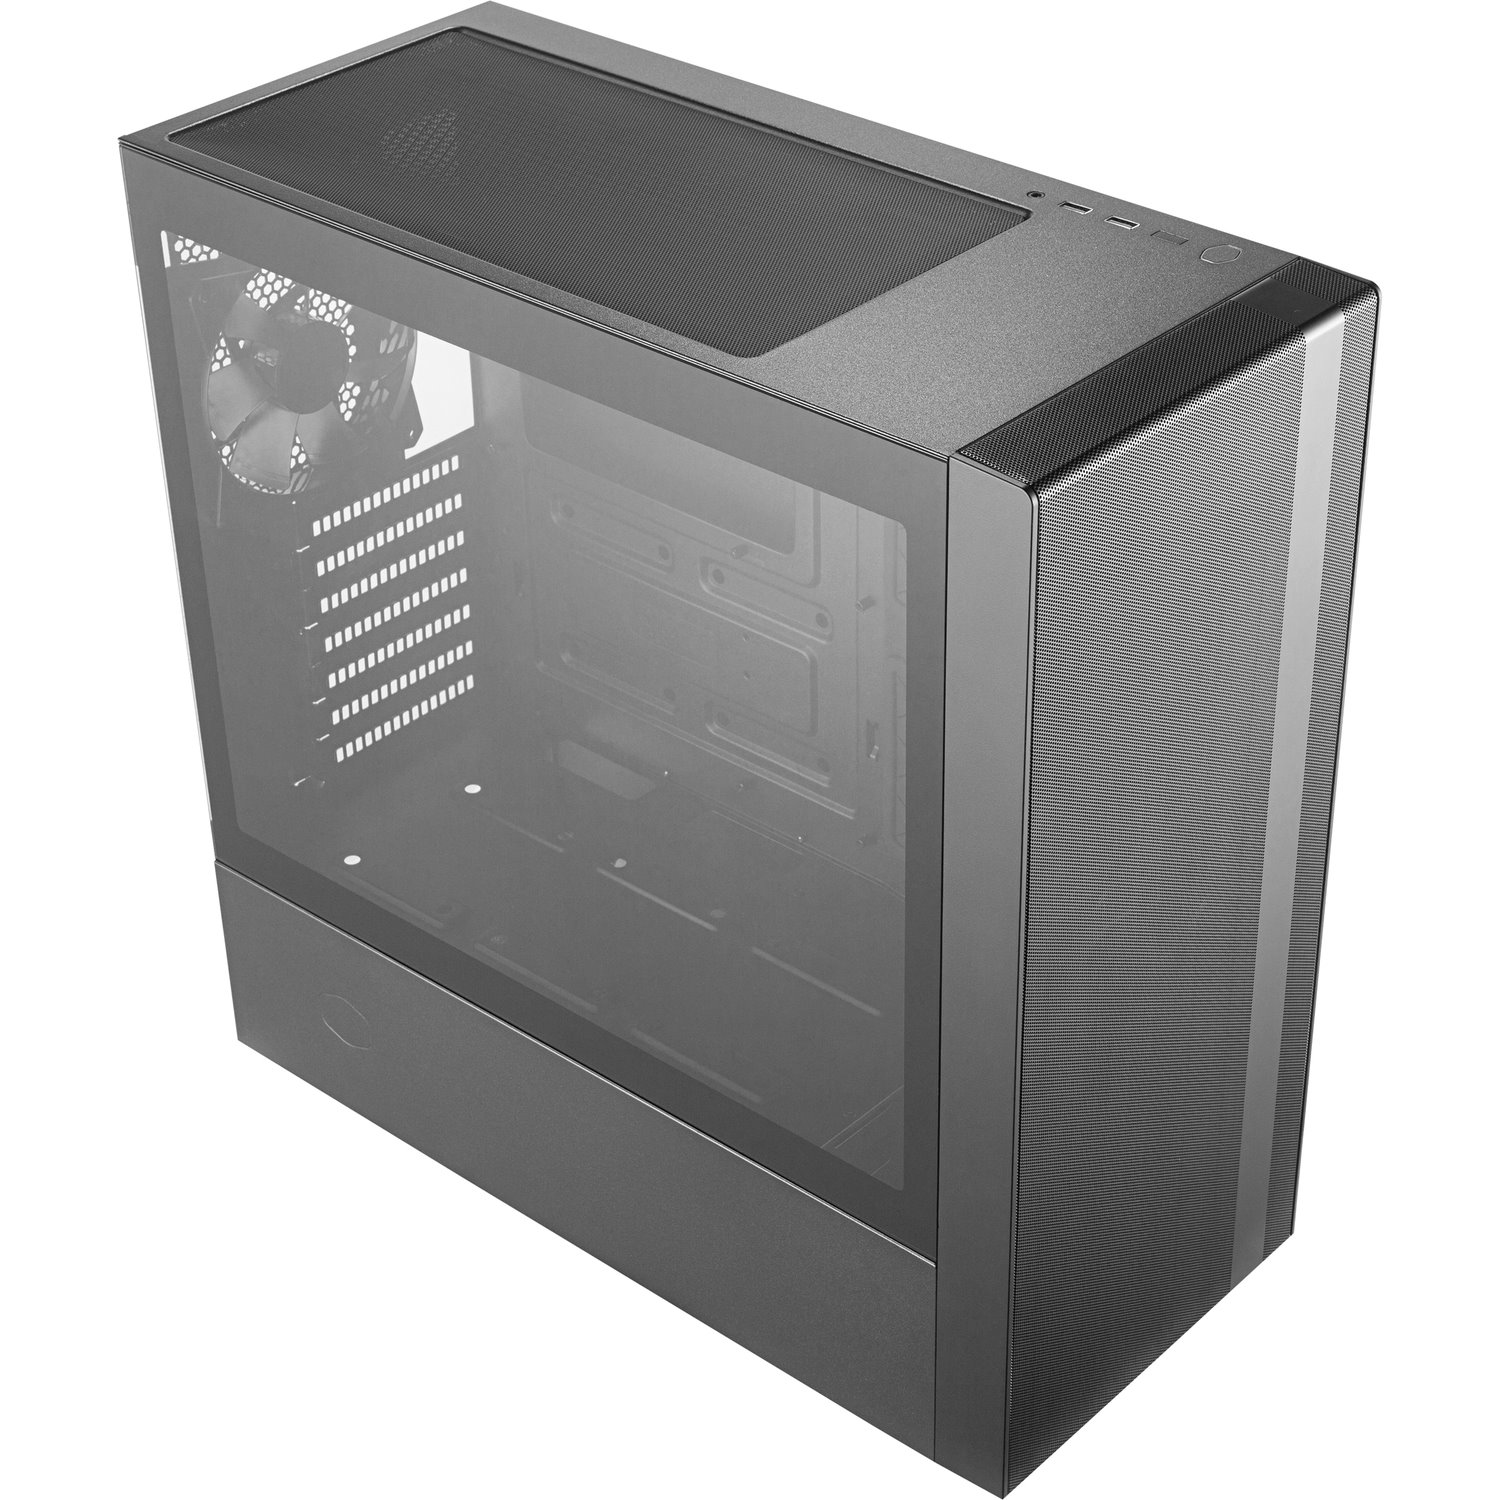 Cooler Master MasterBox MCB-NR600-KGNN-S00 Computer Case - Mini ITX, Micro ATX, ATX Motherboard Supported - Mid-tower - Mesh, Steel, Plastic, Tempered Glass - Black